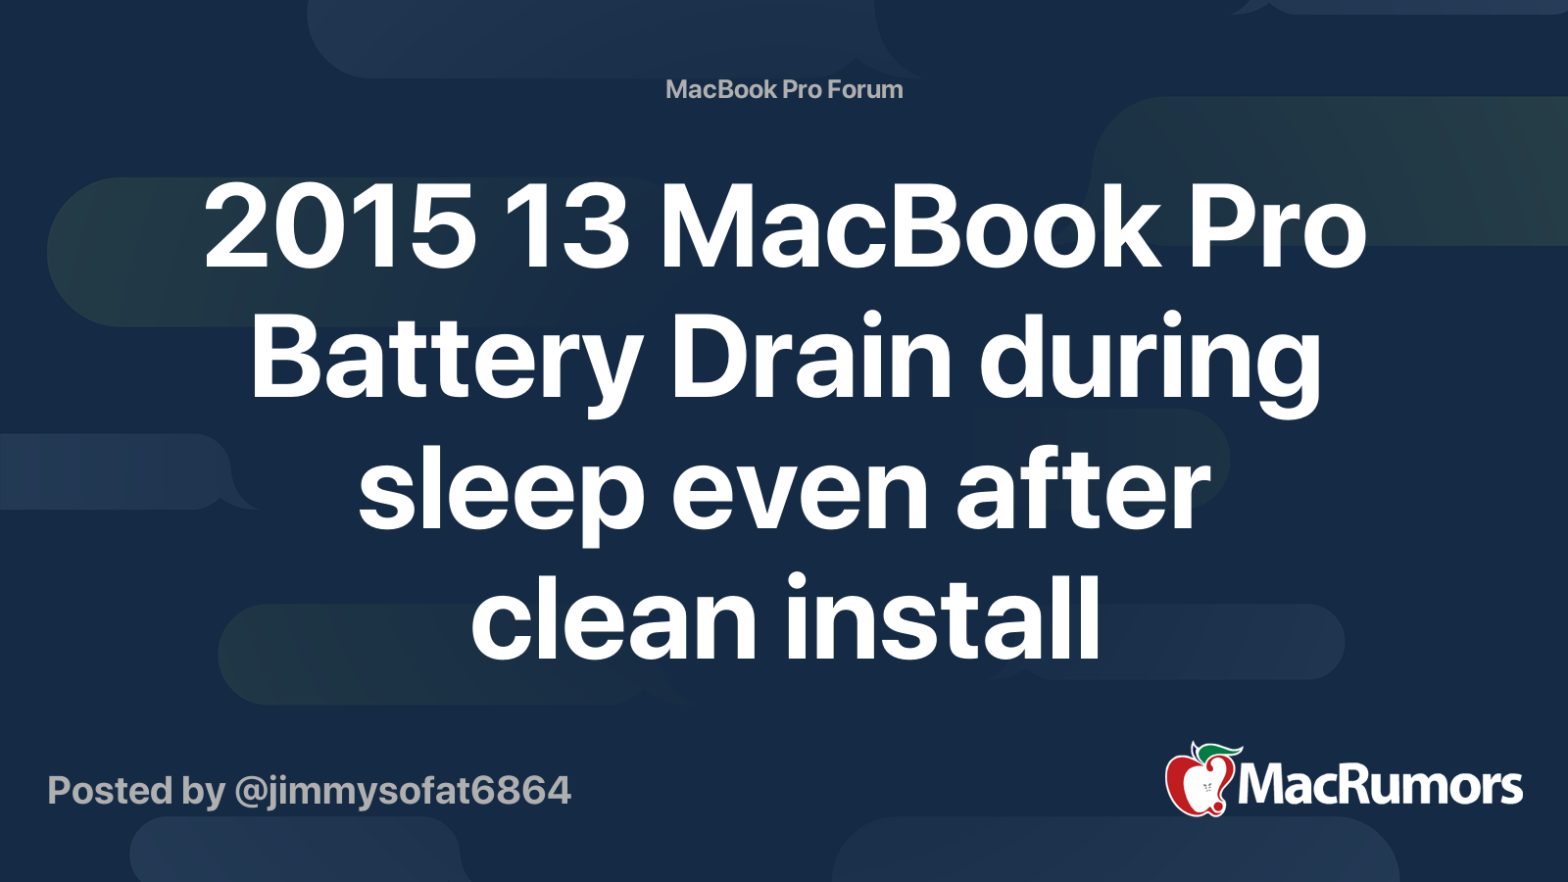 2015 13 MacBook Pro Battery Drain during sleep even after clean install – Mac Rumors